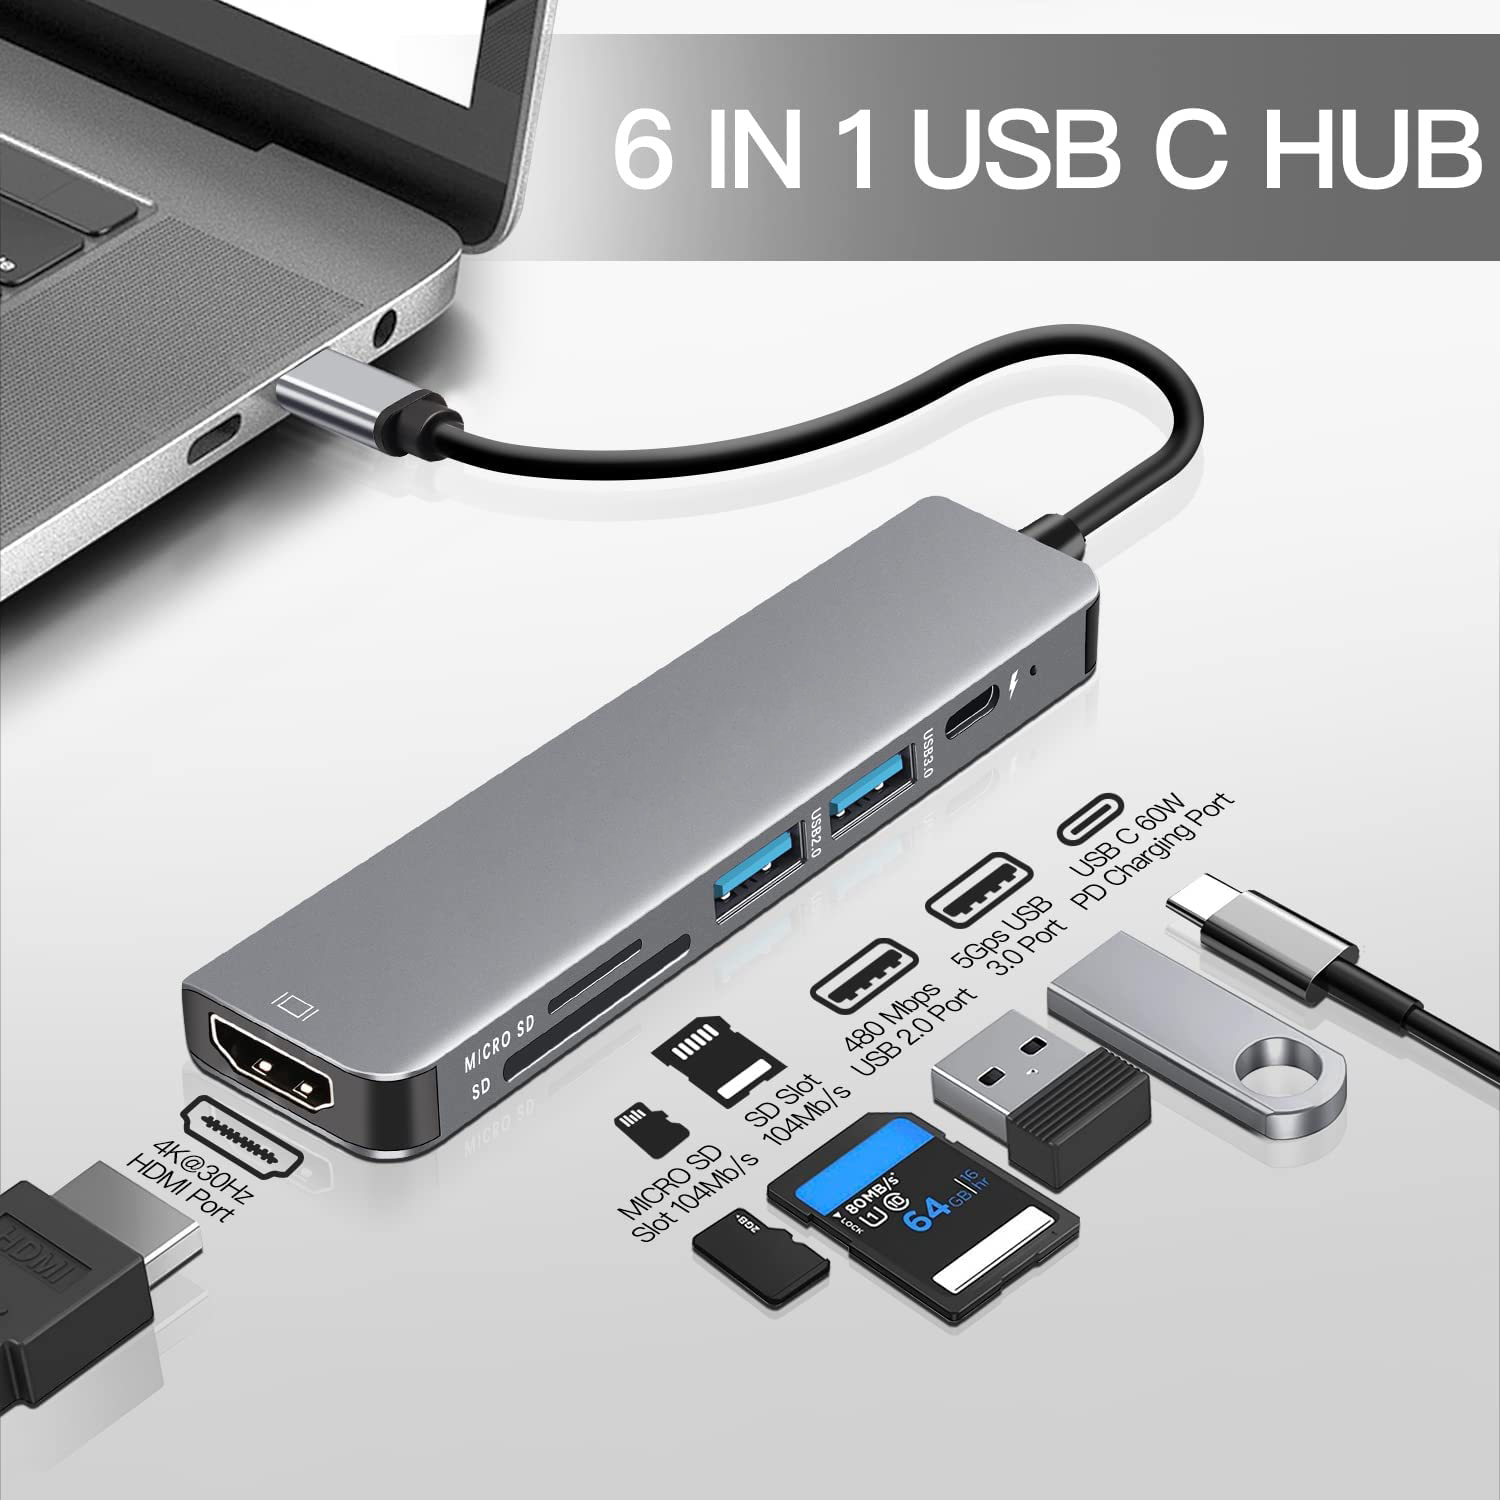 Bakeey 6-in-1 USB-C Hub Adapter HDMI 4K@30Hz USB3.0 USB-C  Docking Station 100W PD Charging SD Reader Witch Splitter for Apple Huawei Laptops Macbook